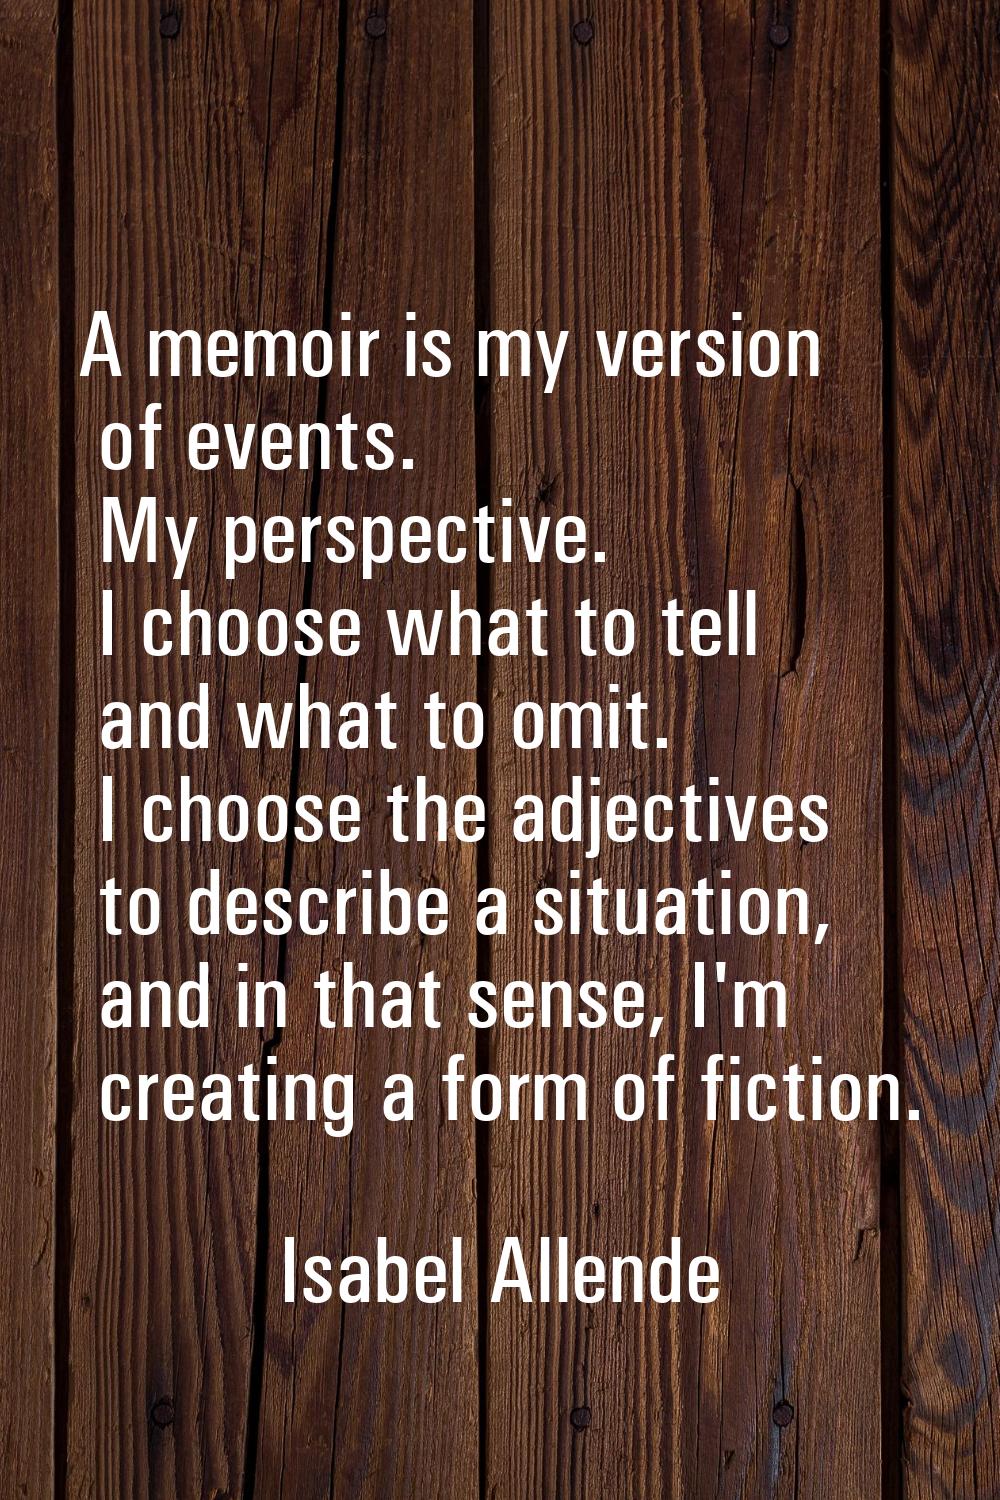 A memoir is my version of events. My perspective. I choose what to tell and what to omit. I choose 